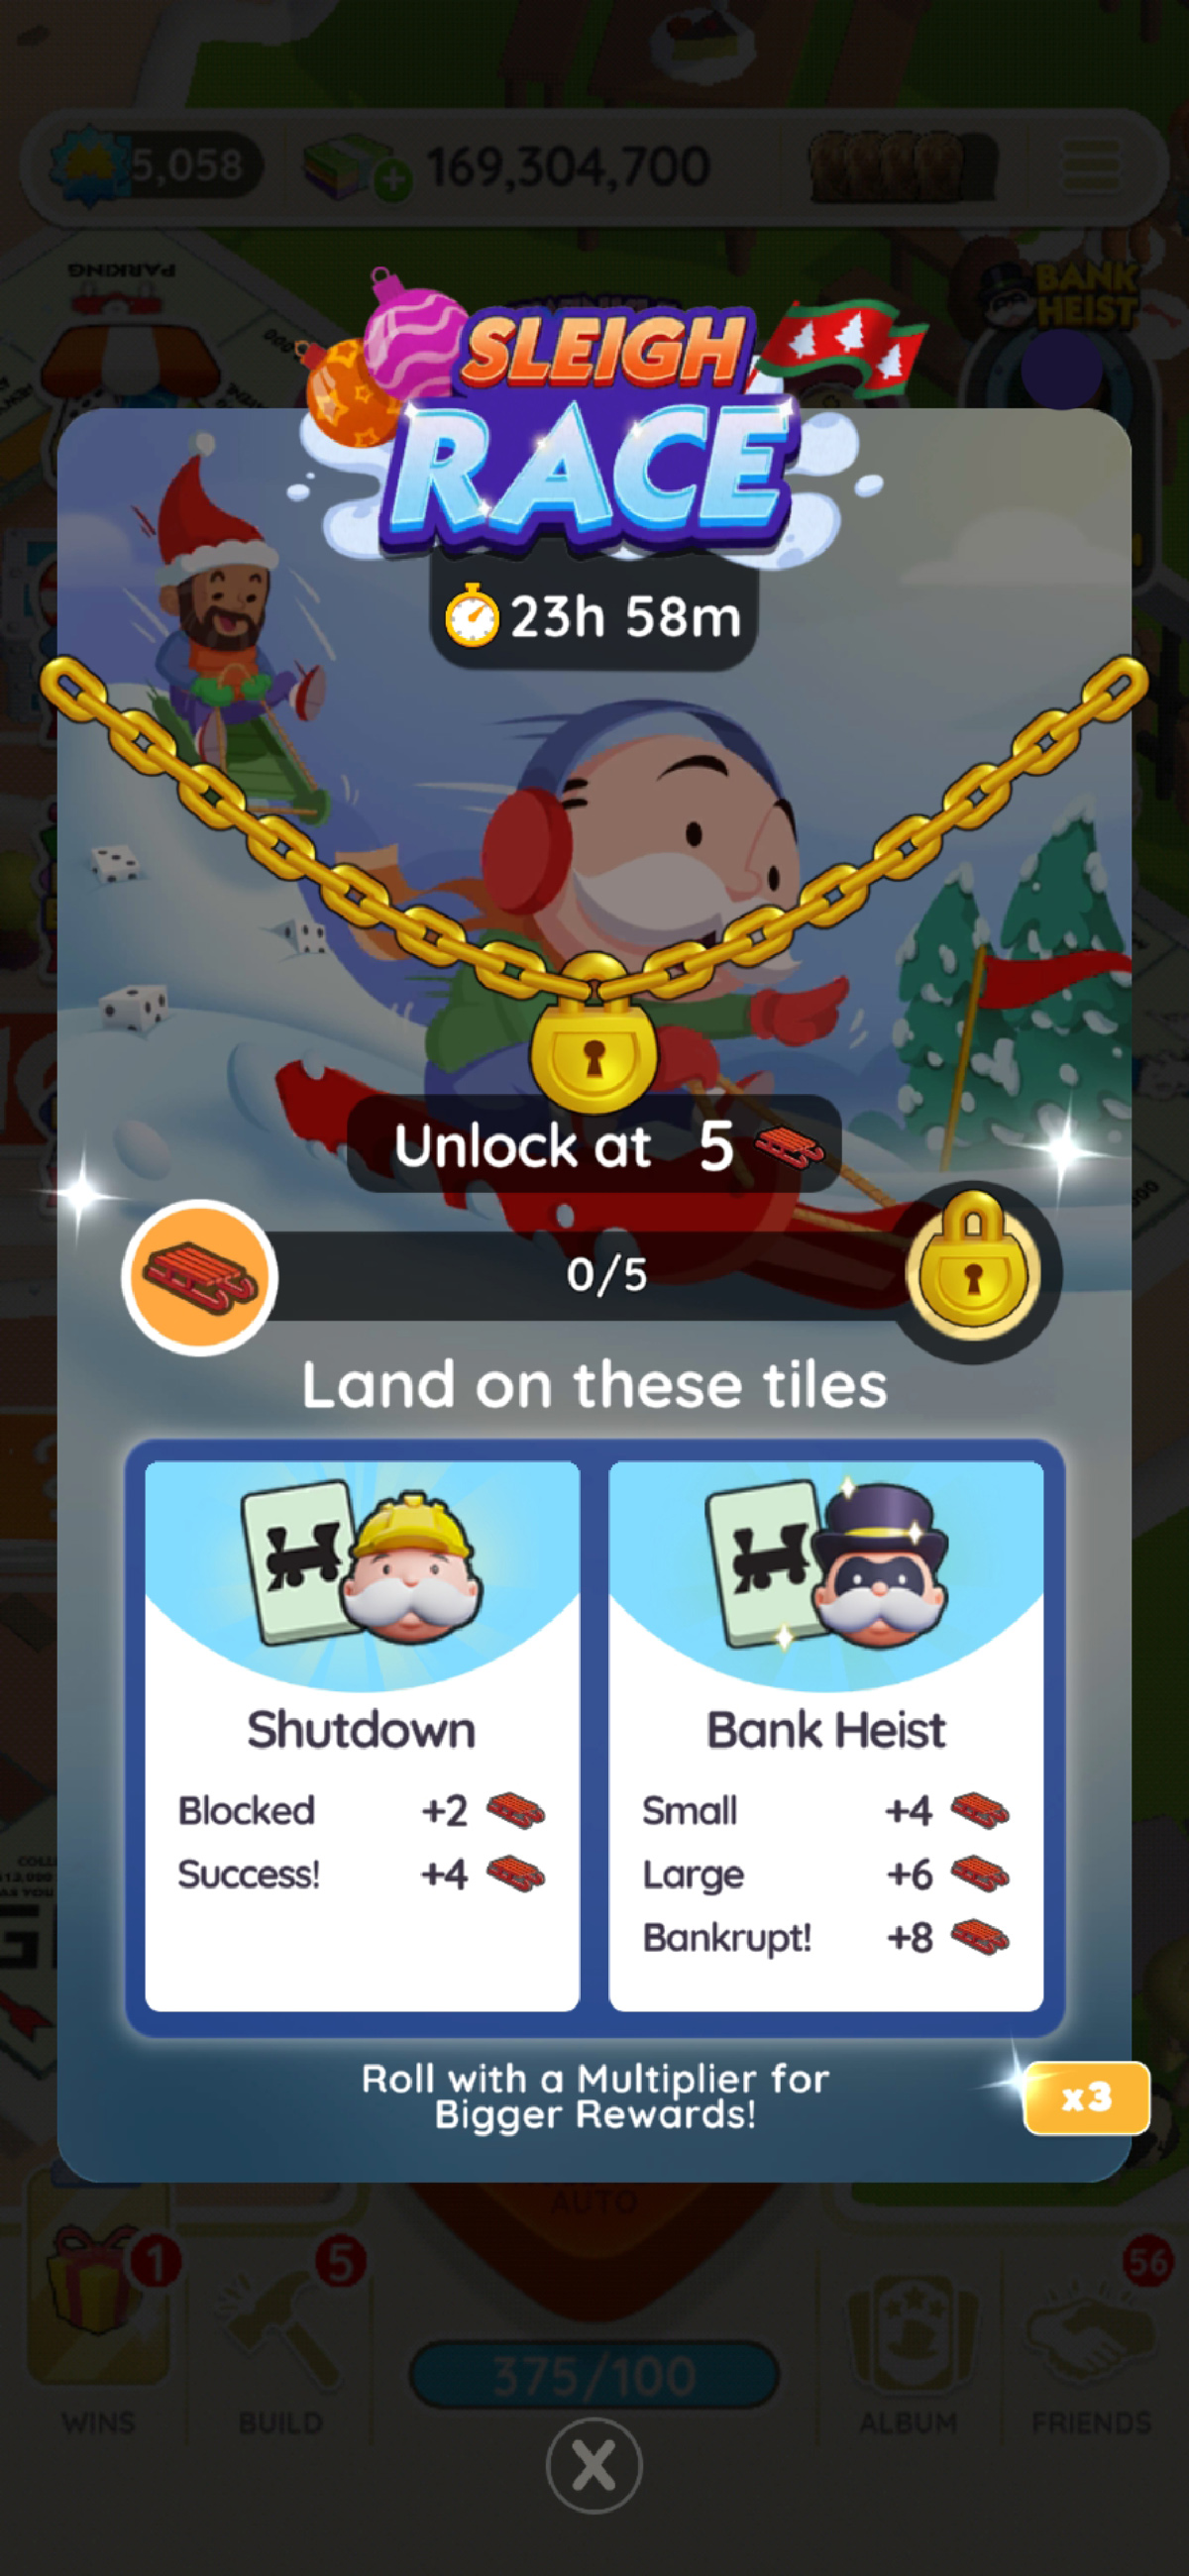 A full-size image for Sleigh Race in Monopoly GO showing Mr. Monopoly riding down hill on a sled, with the image being part of an article on all the rewards, milestones, and prizes you can get for the tournament, as well as how to play and win.